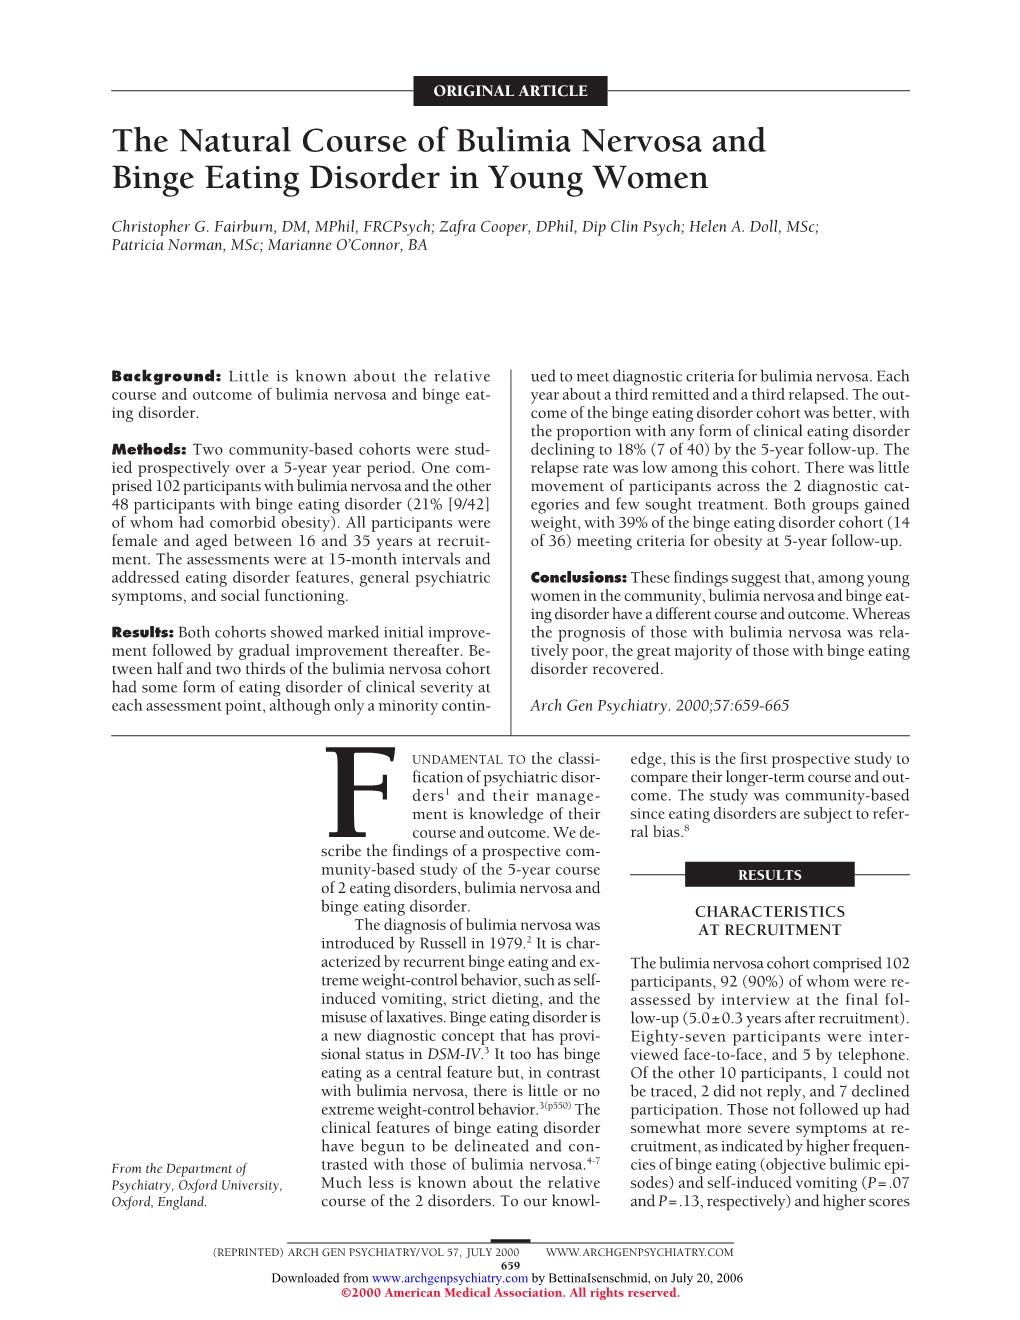 The Natural Course of Bulimia Nervosa and Binge Eating Disorder in Young Women